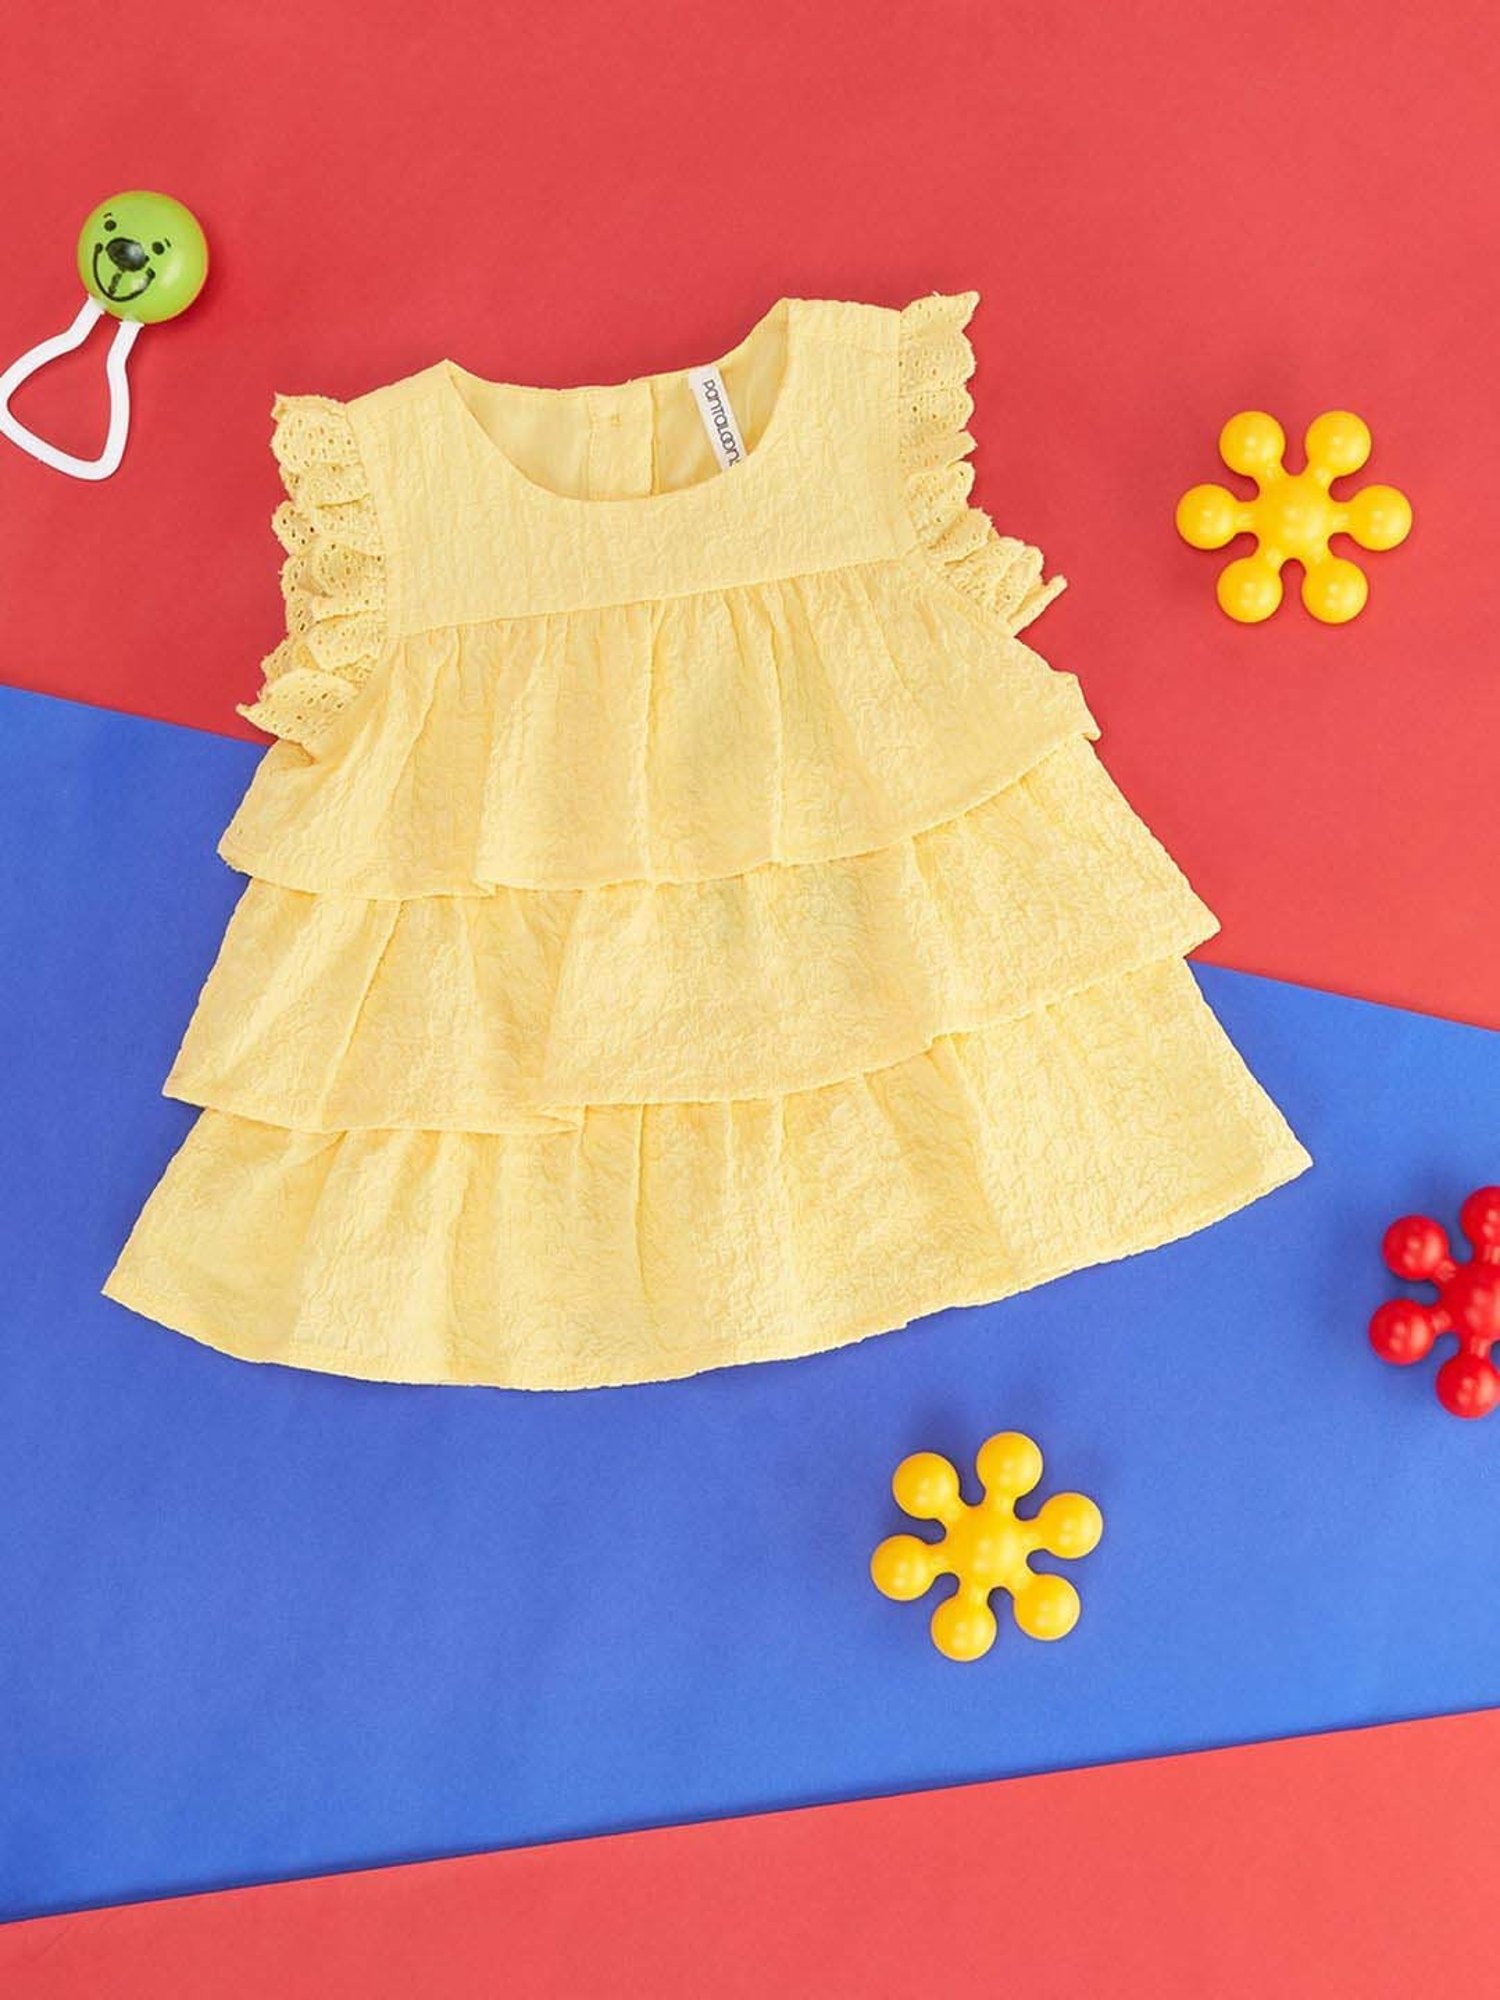 Buy HIGHKIDS CLOTHING Frock Dress for Baby Girl Yellow at Amazon.in